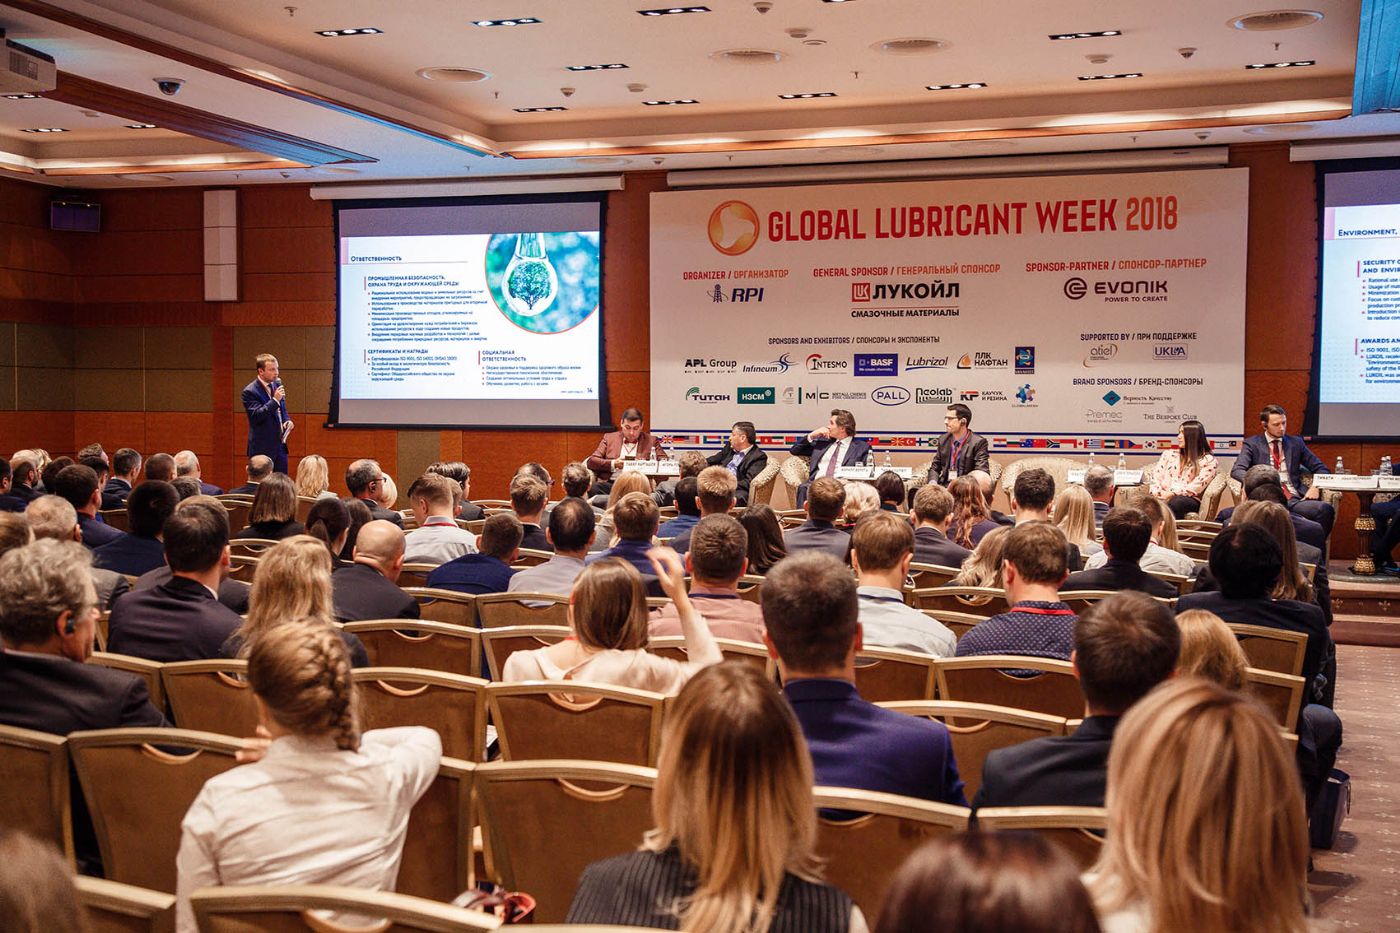 Only 8 weeks left for Global Lubricant Week 2019!